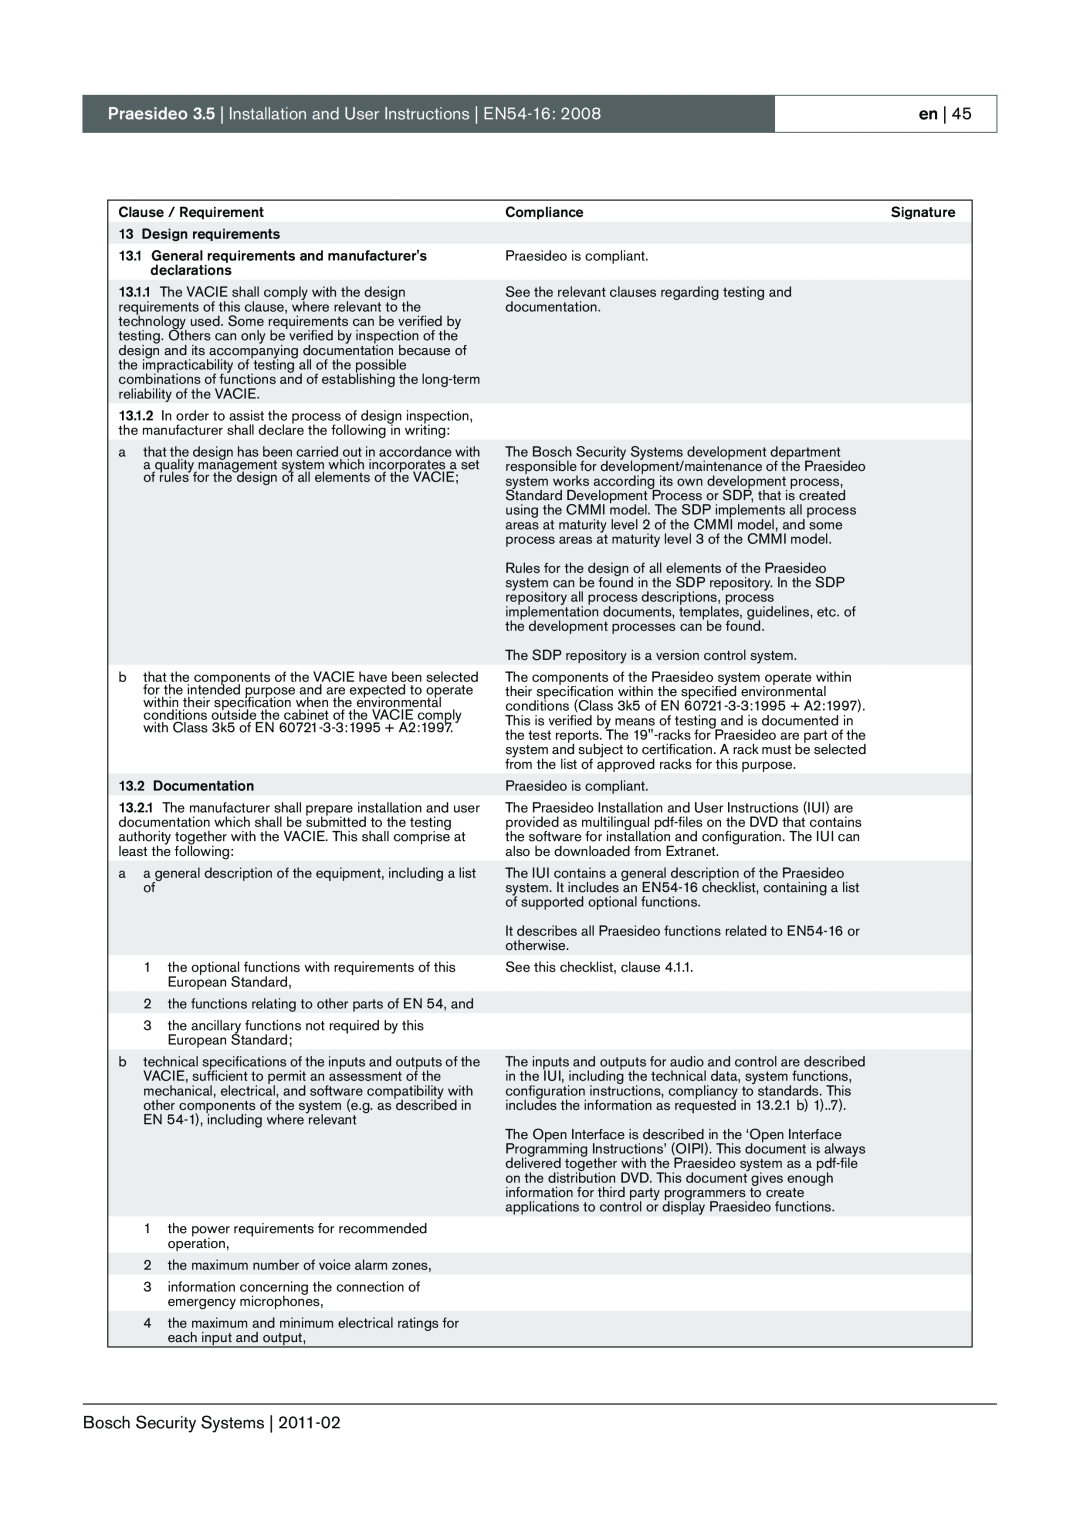 Bosch Appliances 3.5 manual Clause / Requirement 13 Design requirements 